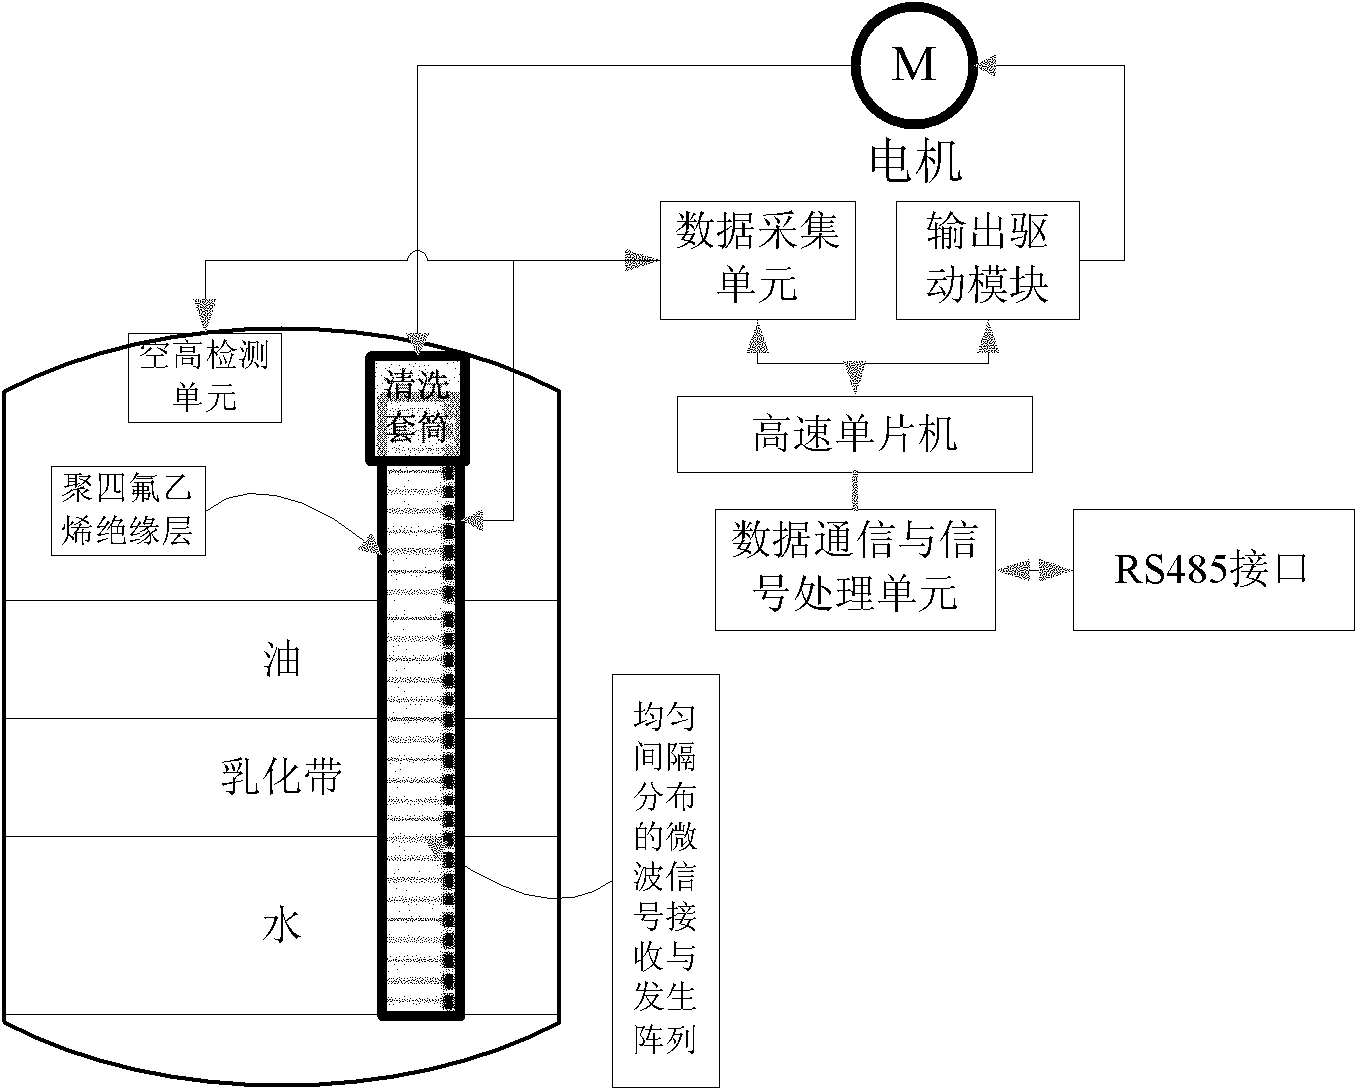 Oil-water interface measuring device of crude oil storage tank and measuring method thereof